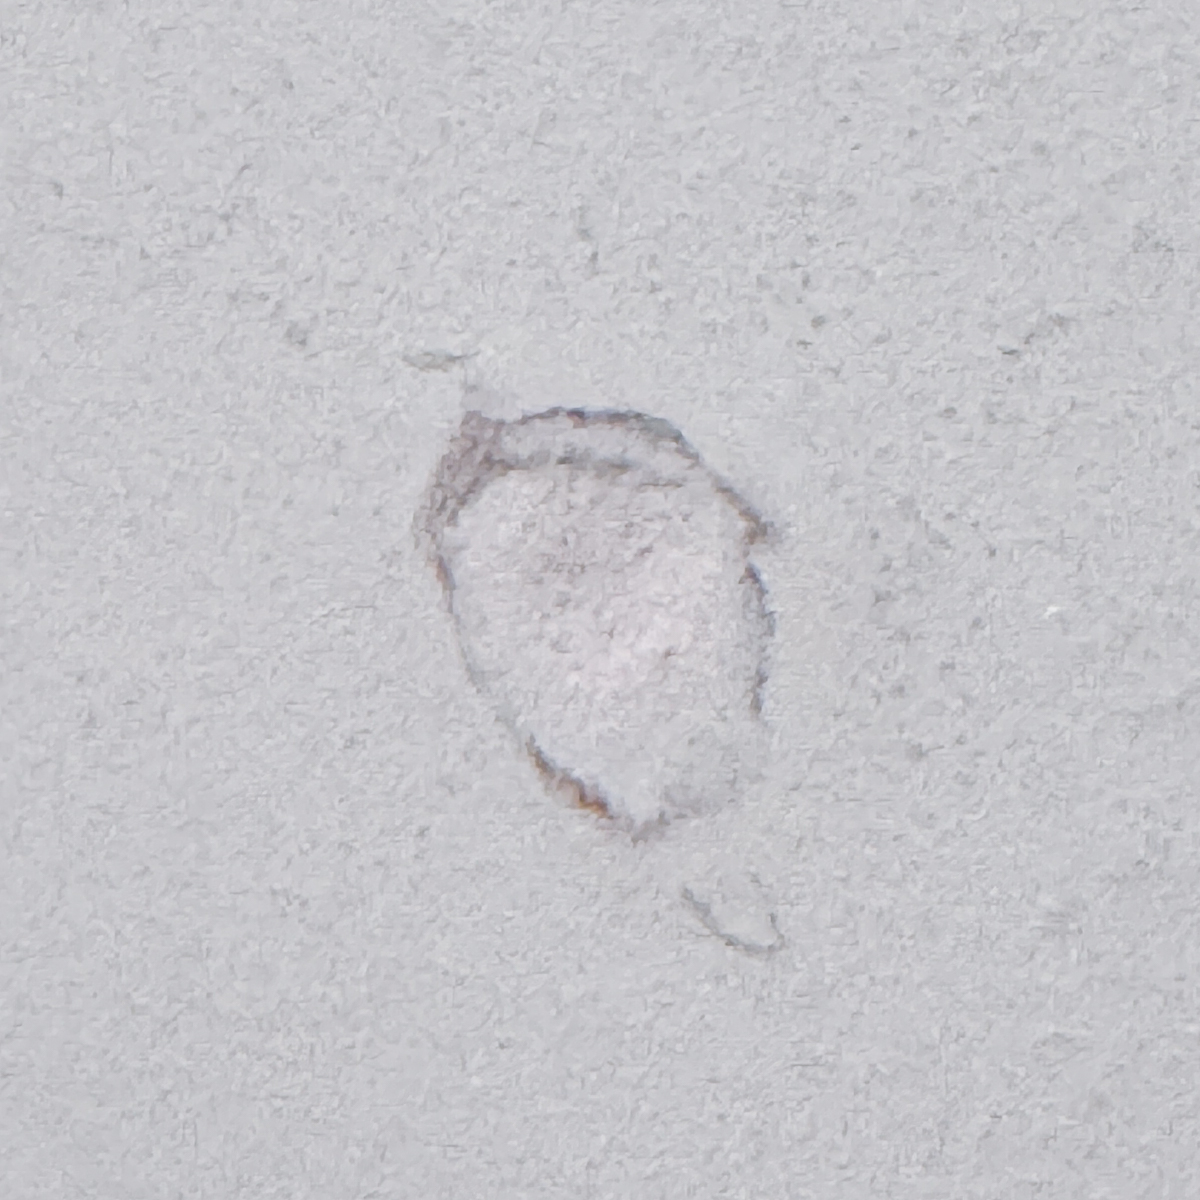 spackle shrunk into the hole